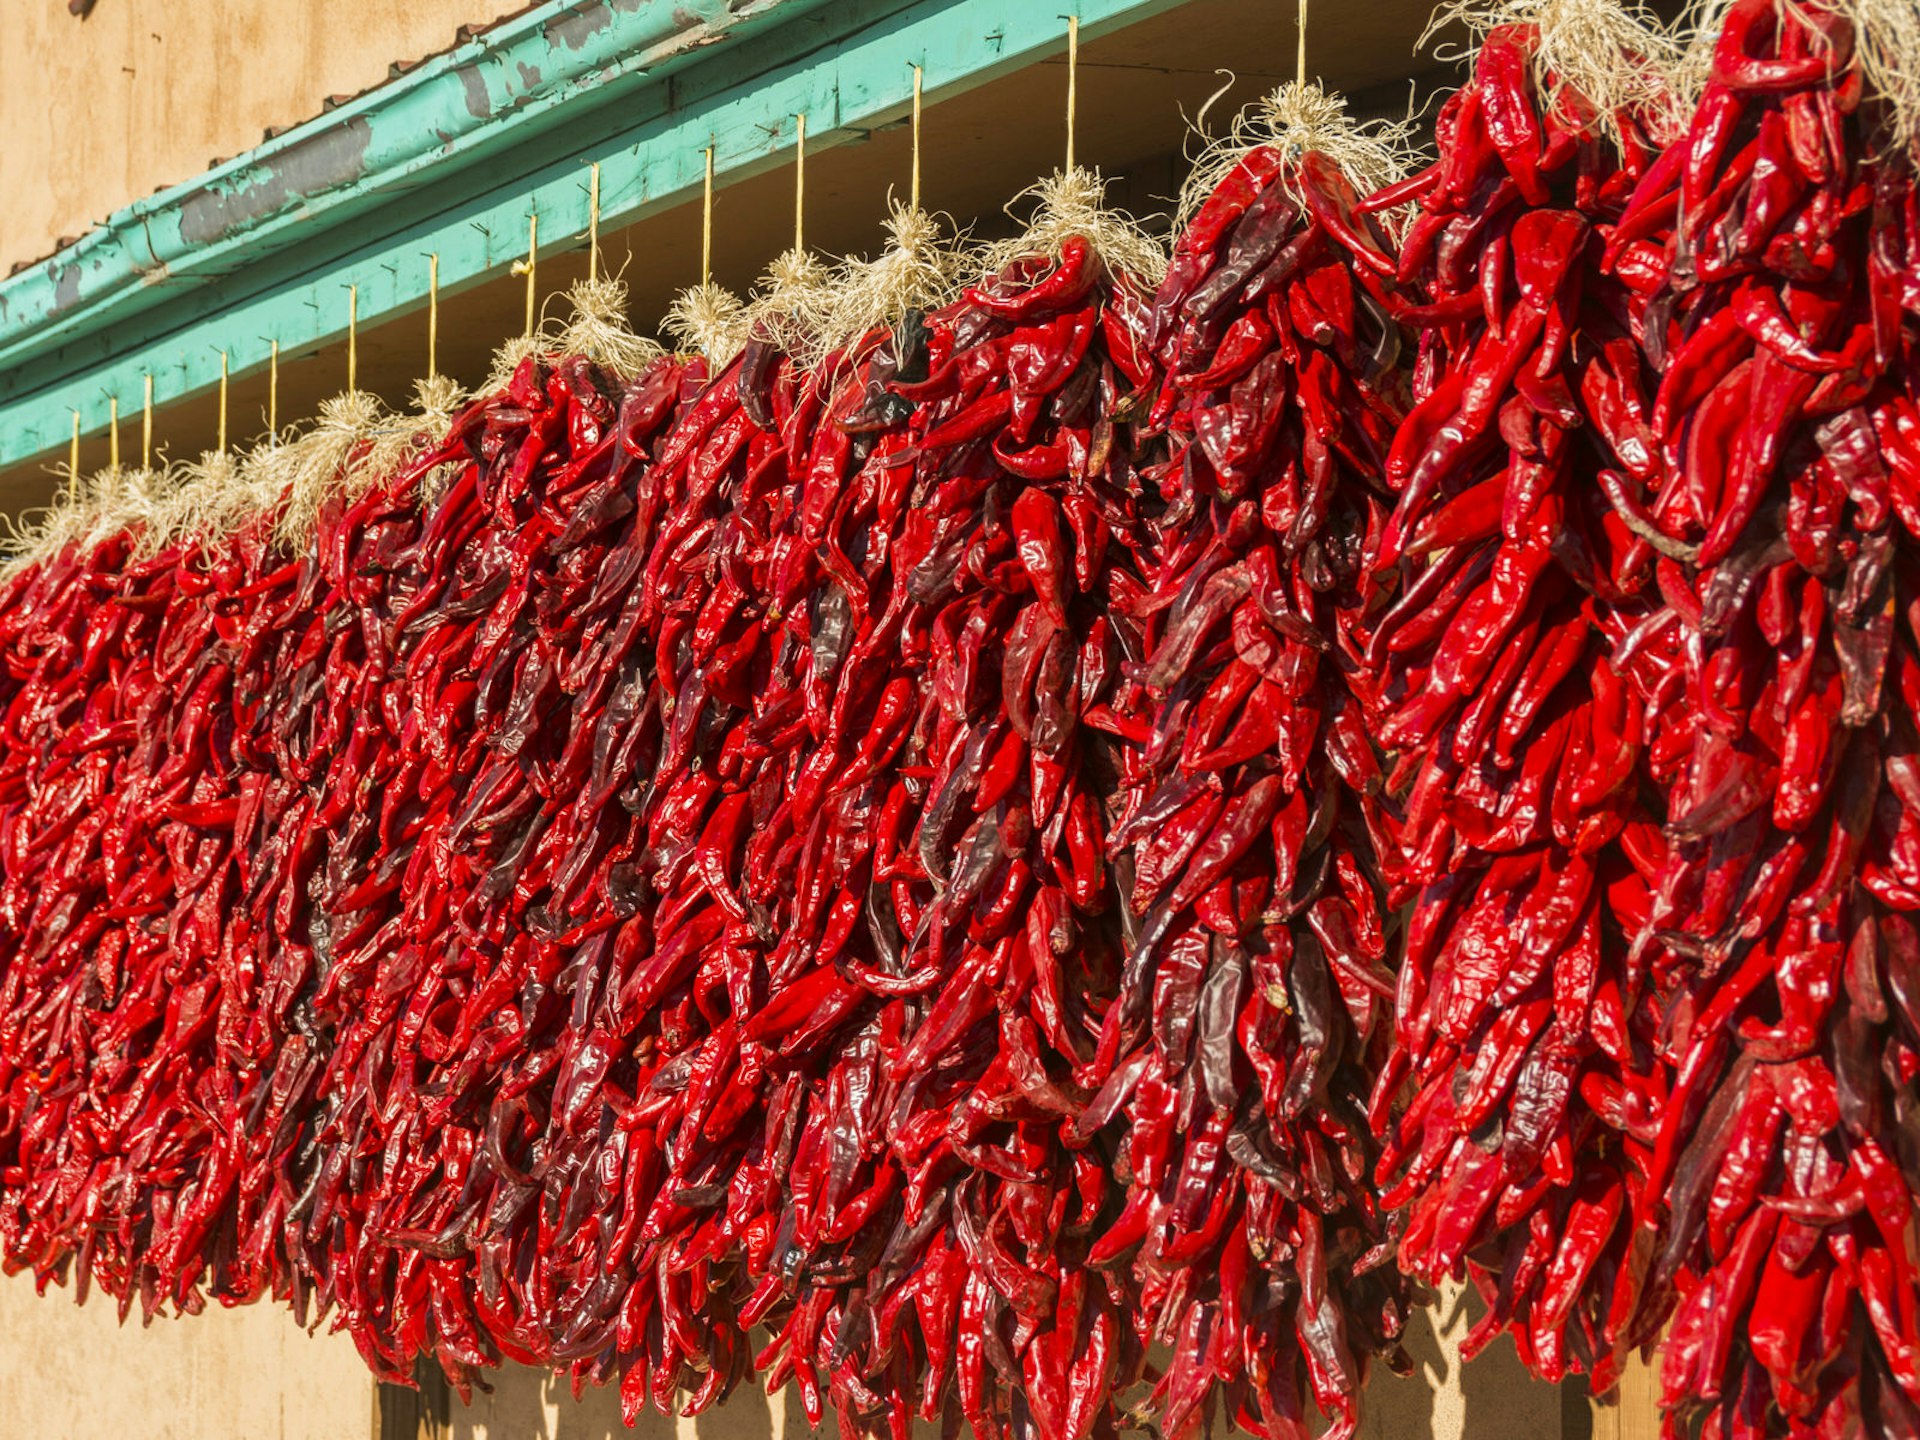 Row of red chile pepper bundles hung outside a building. Chile peppers, sometimes hung on ristra strings, are the drawcard of New Mexican cuisine © John Elk III / Getty Images